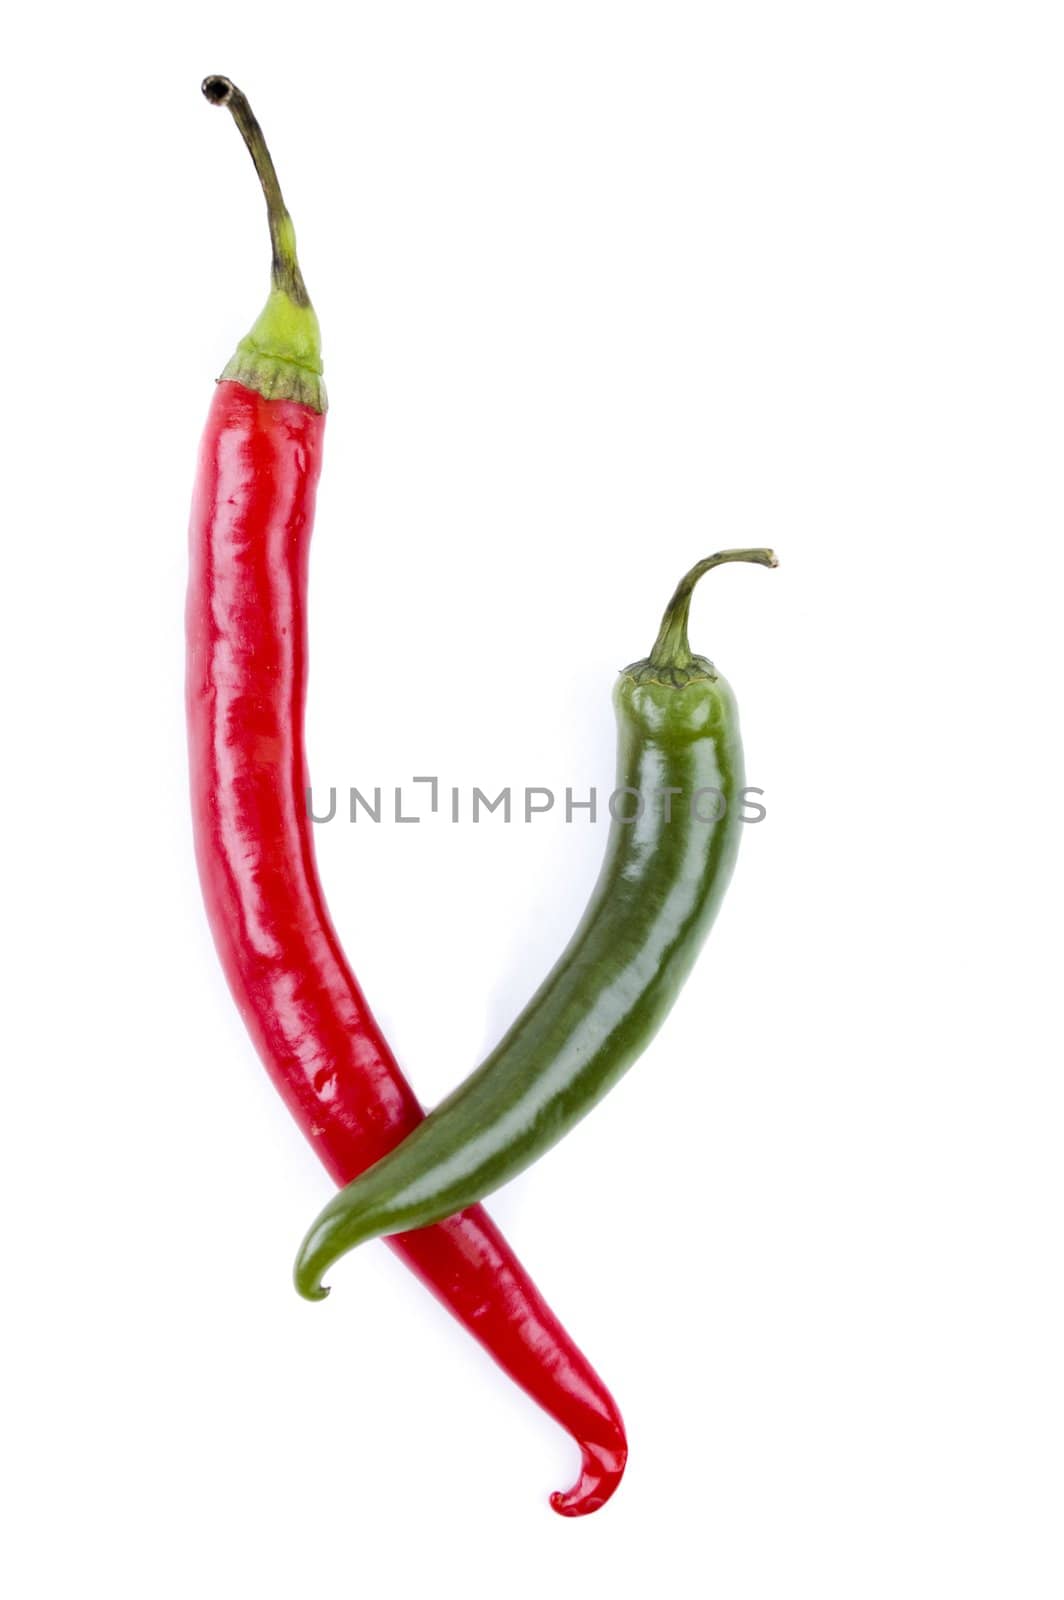 Red and green chili peppers on white background